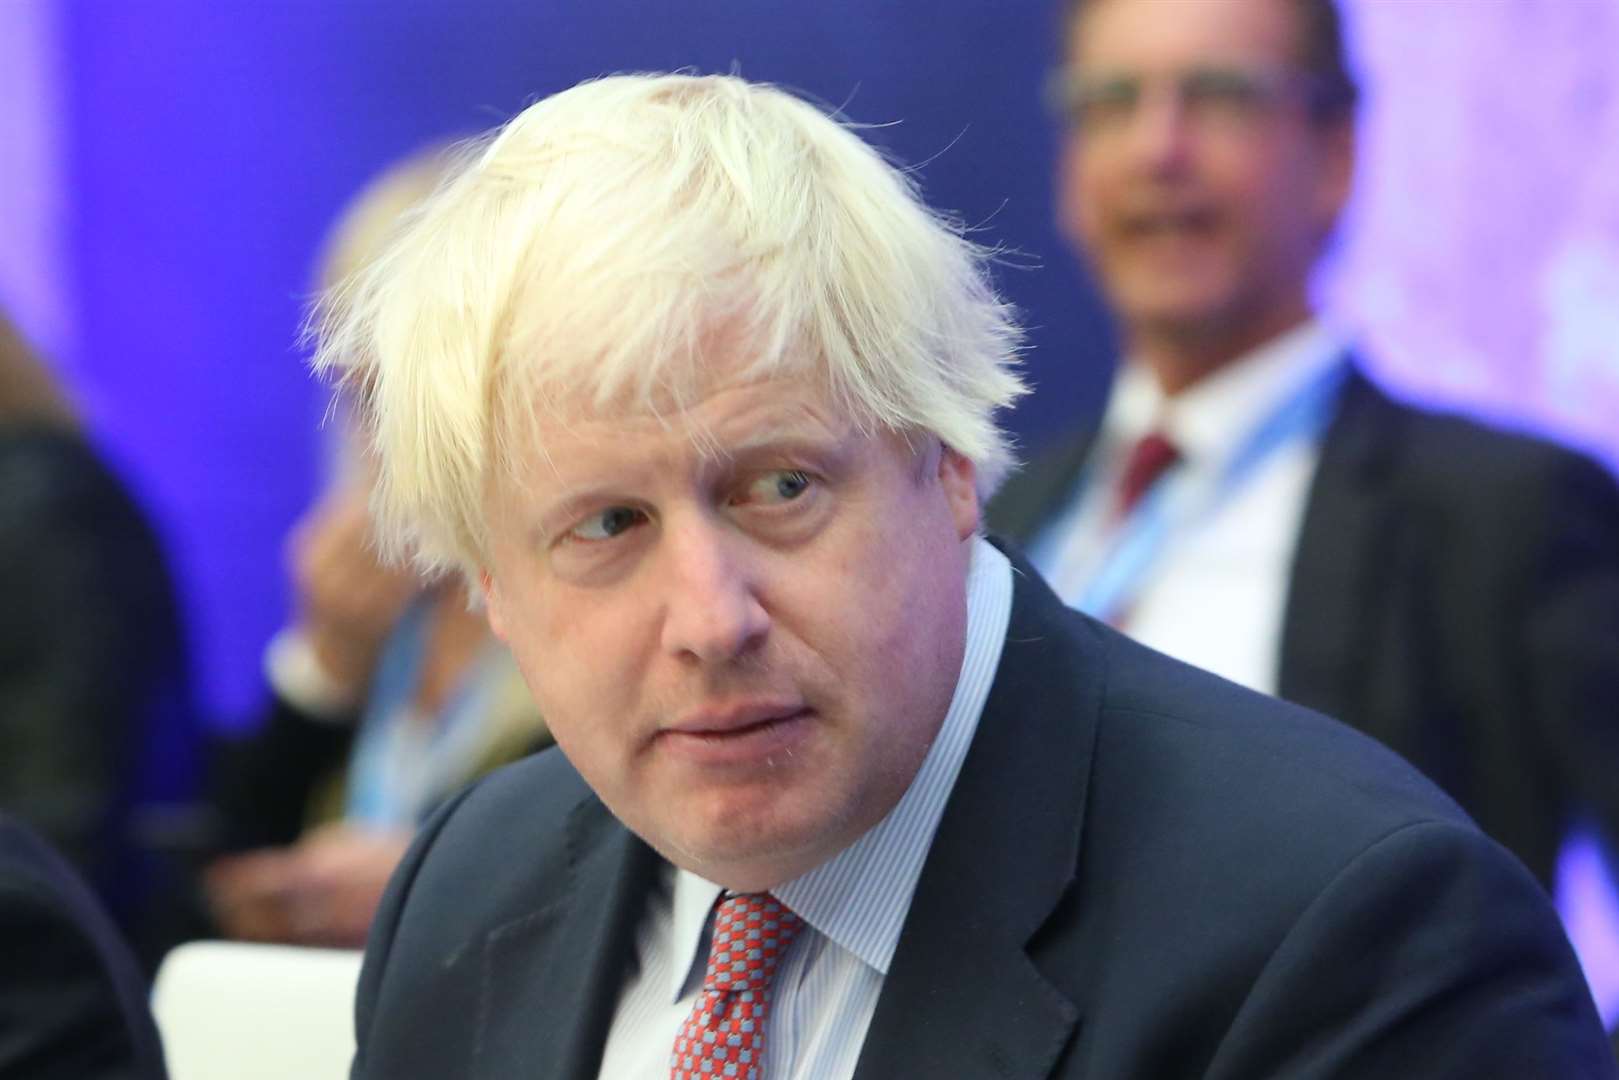 Boris Johnson put his name forward in the Conservative leadership race before pulling out